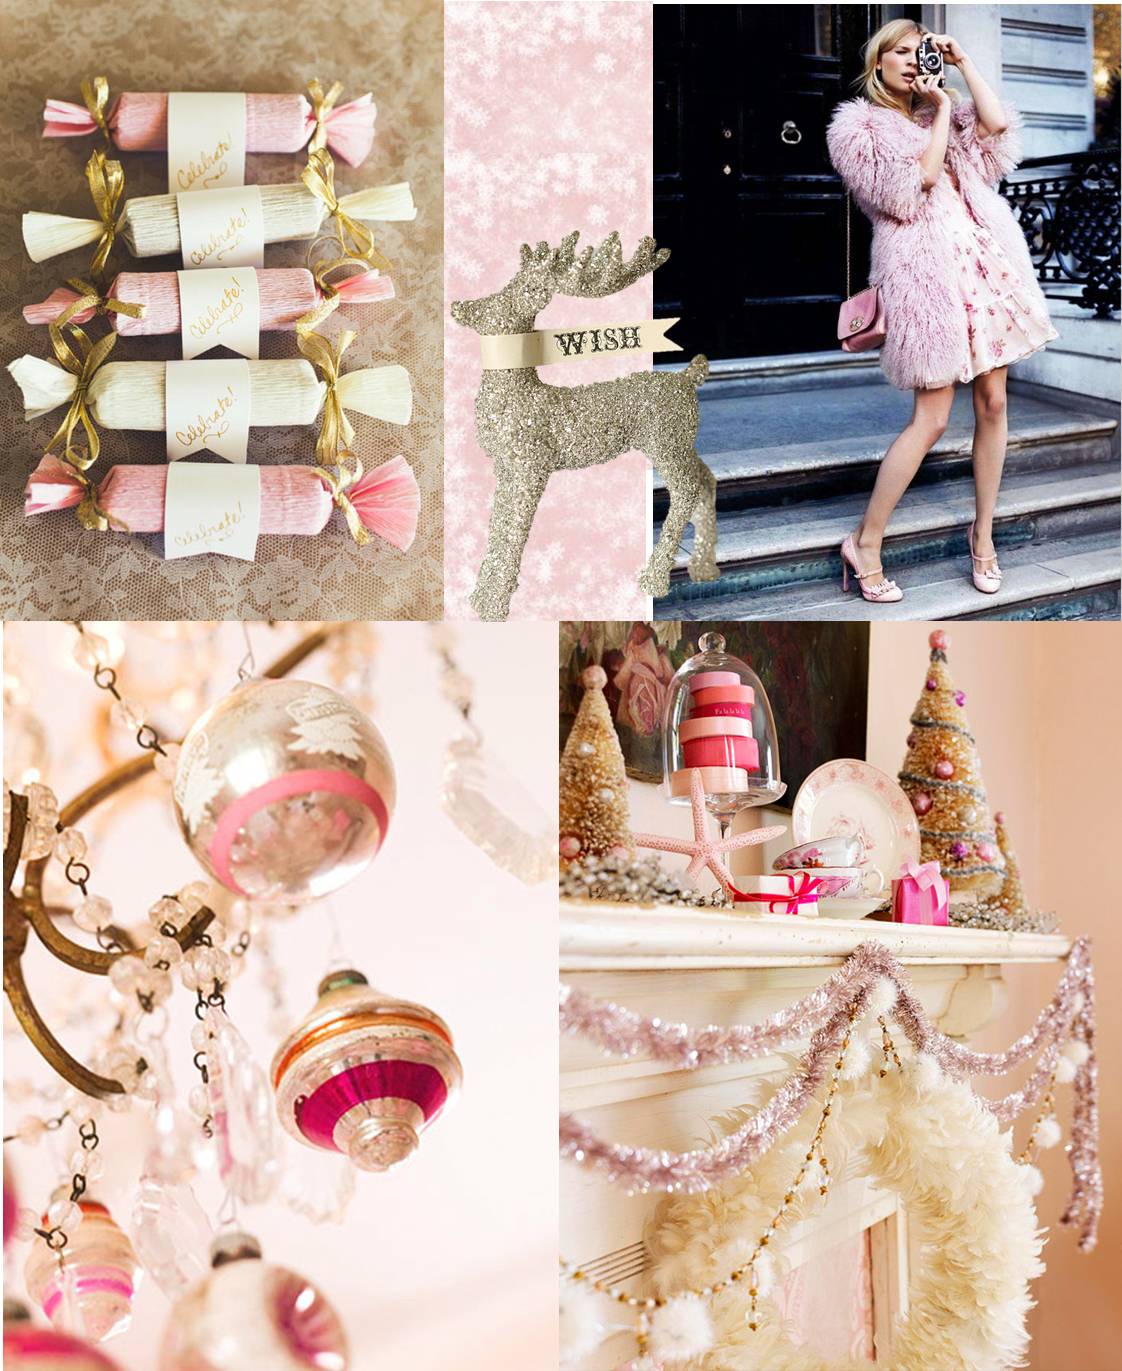 rivernorthLove: A Pink & Gold Christmas